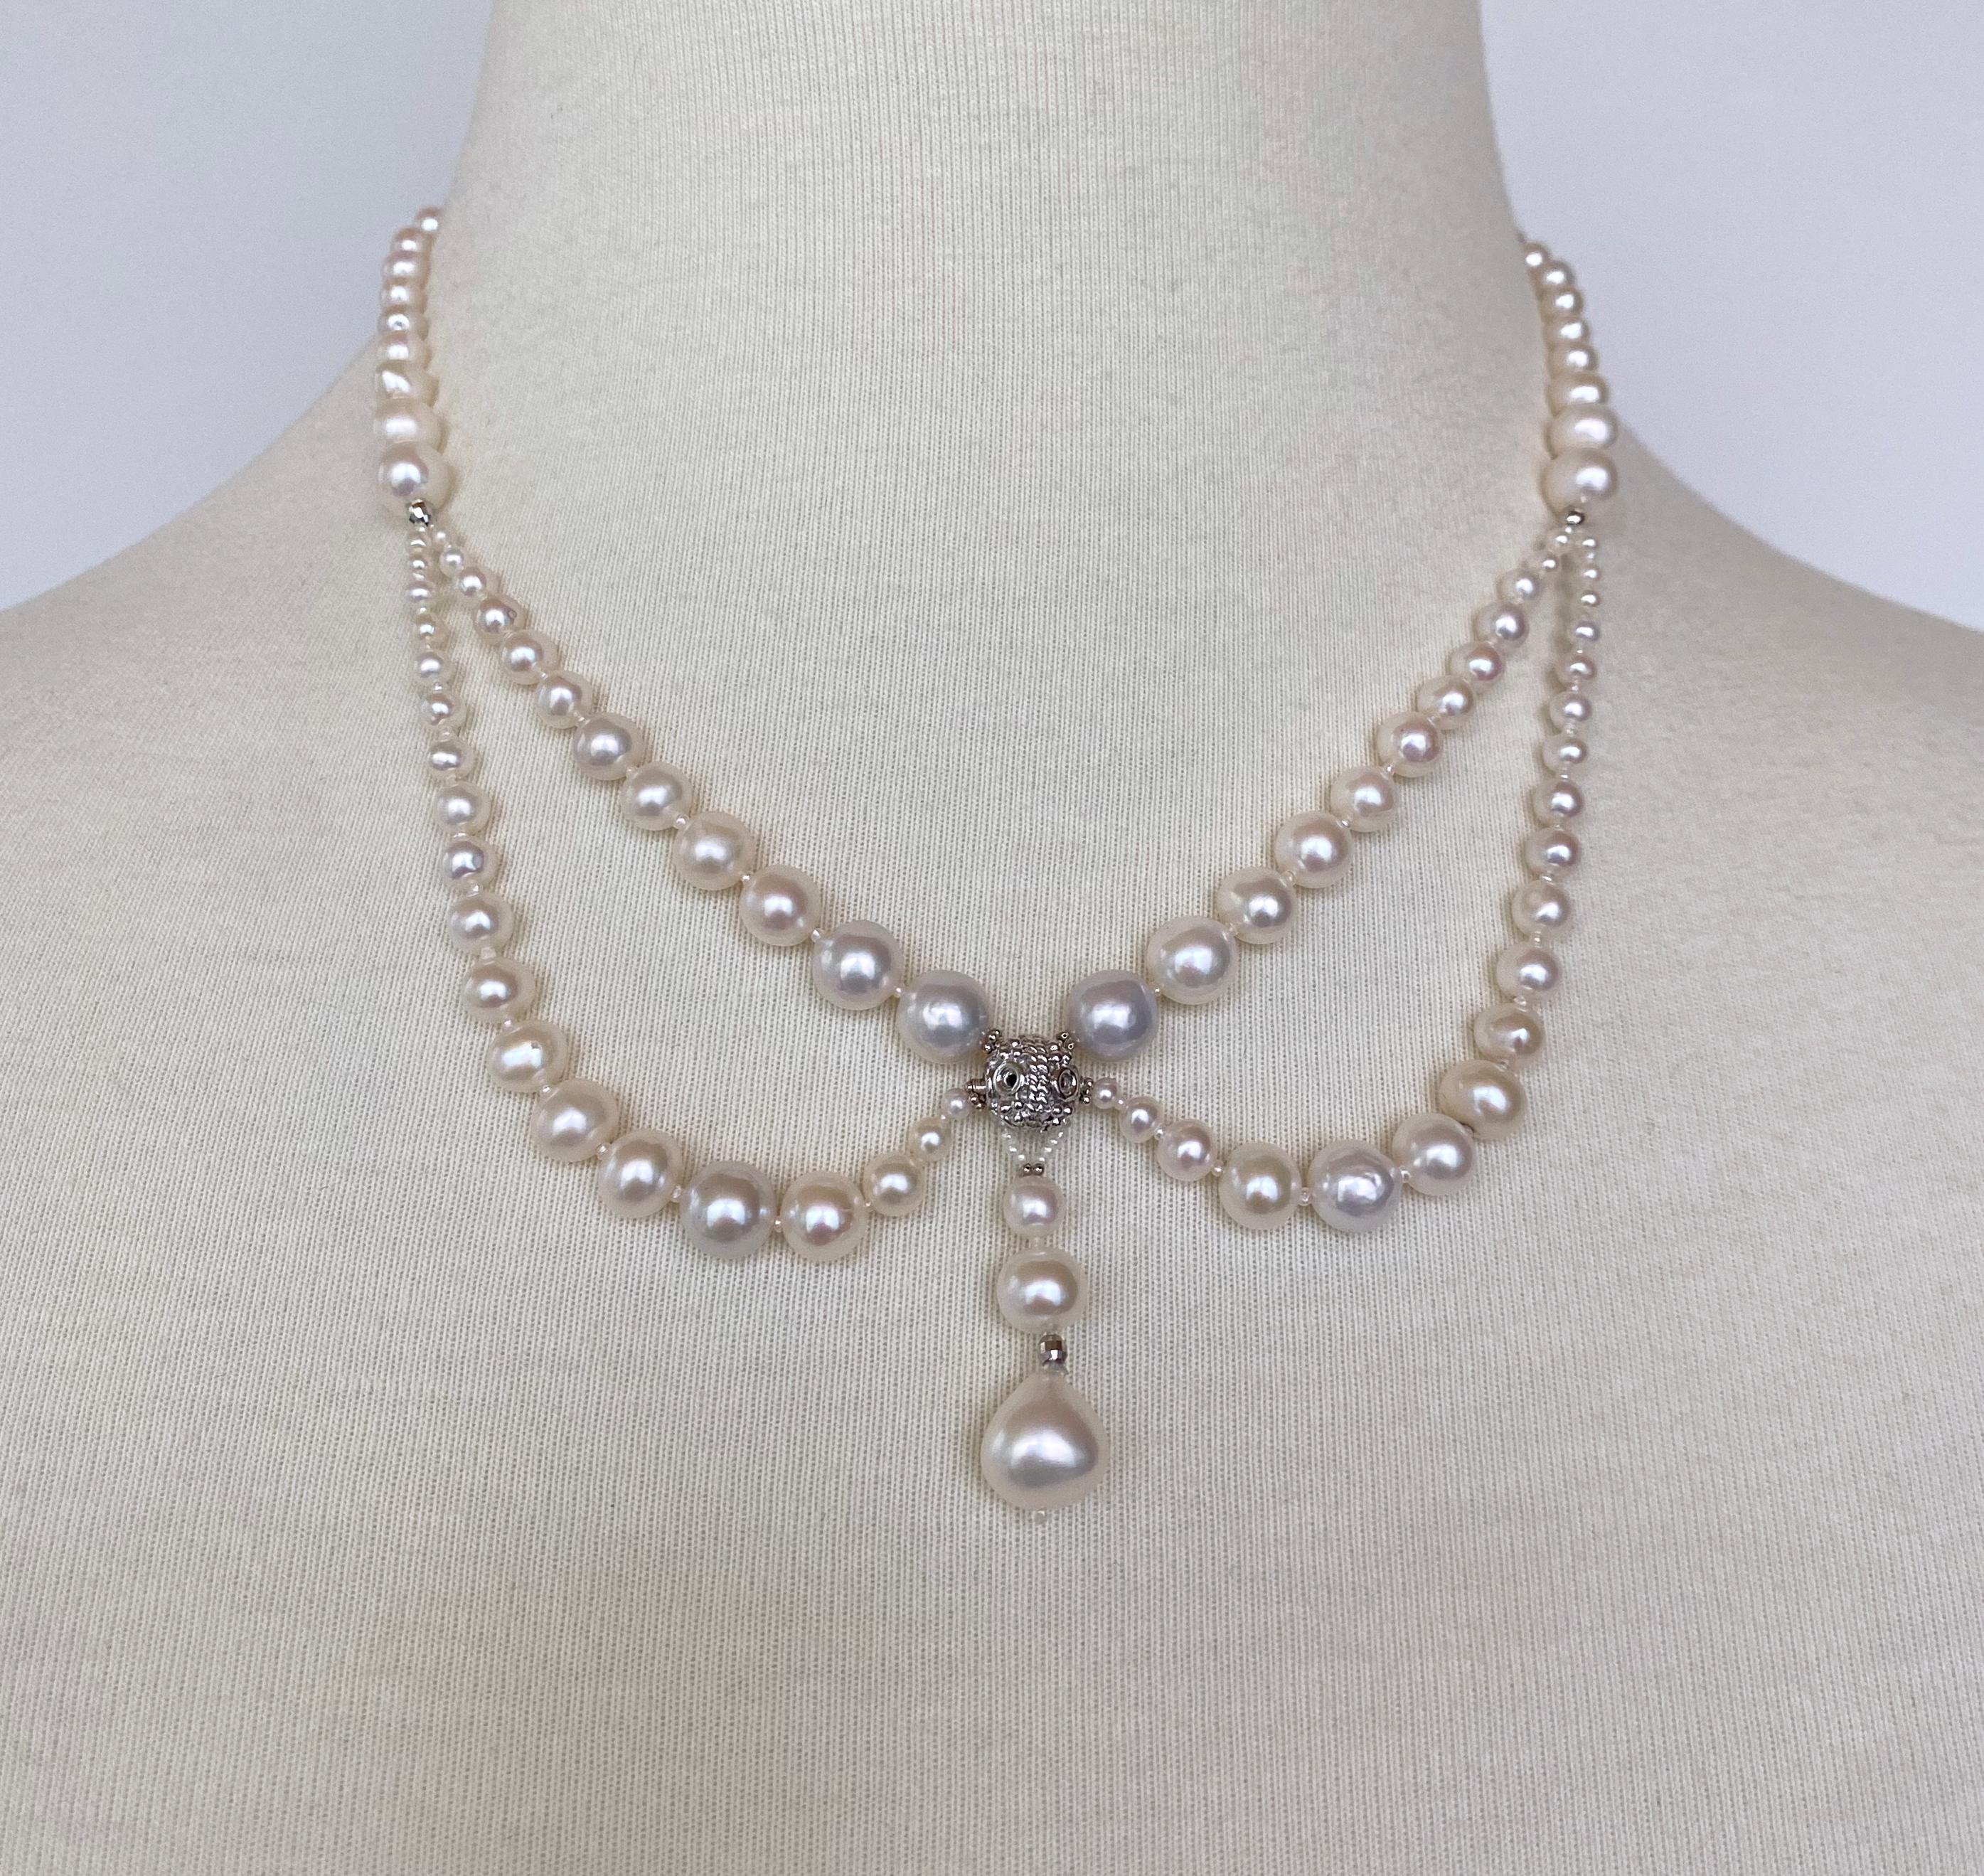 Artisan Marina J. Victorian Inspired Pearl and Rhodium Draped Romance Necklace For Sale